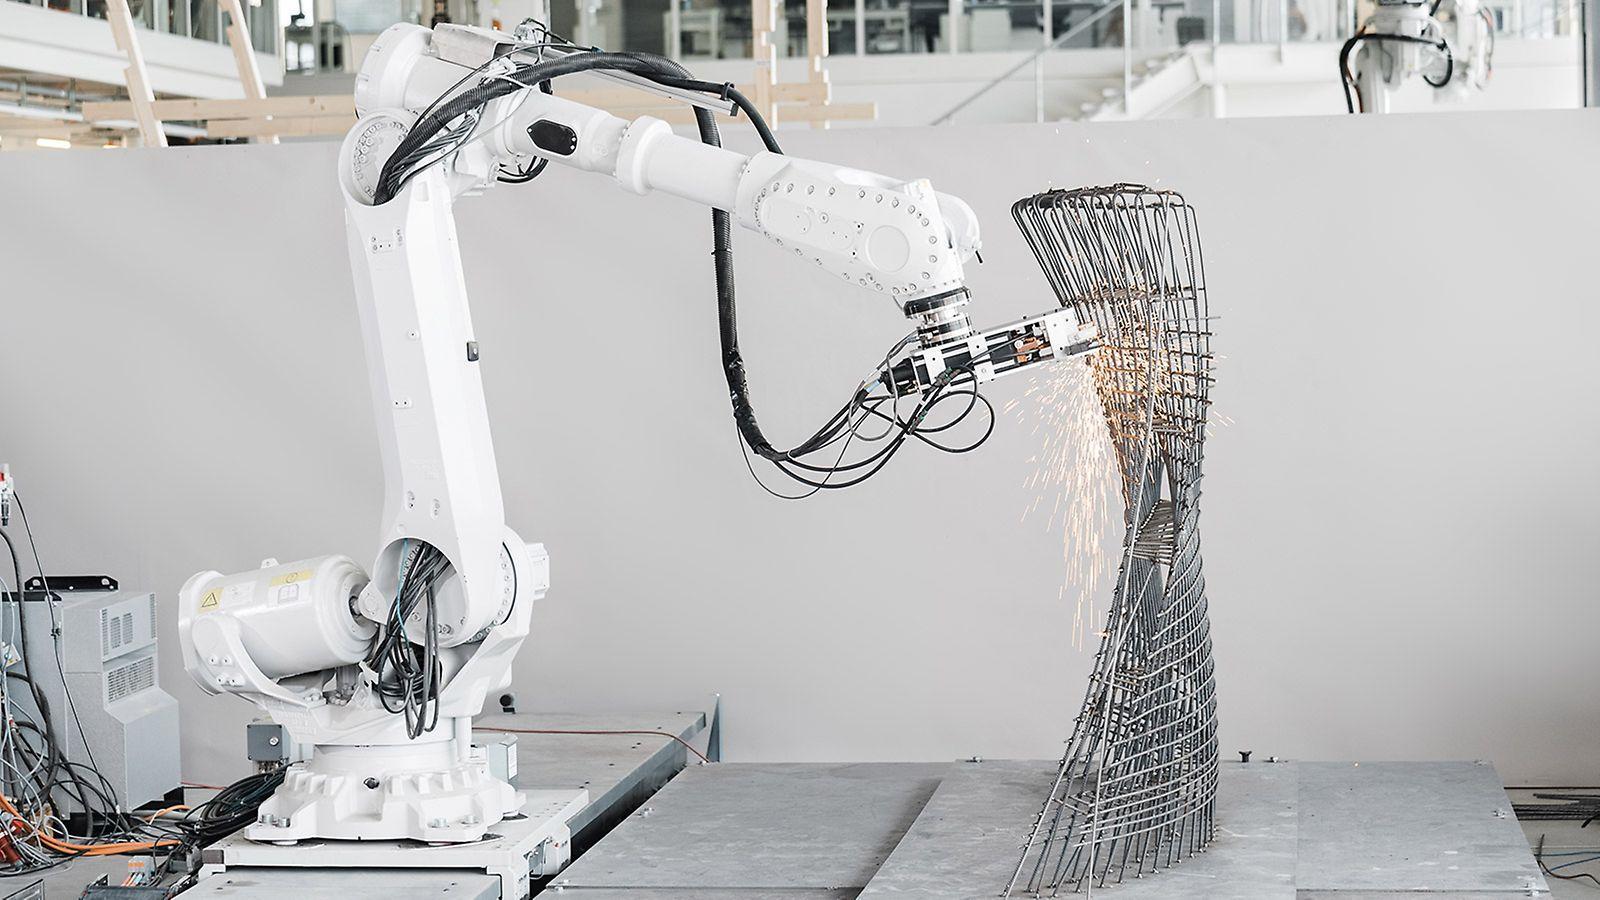 Sika and PERI investing in Zurich construction robot